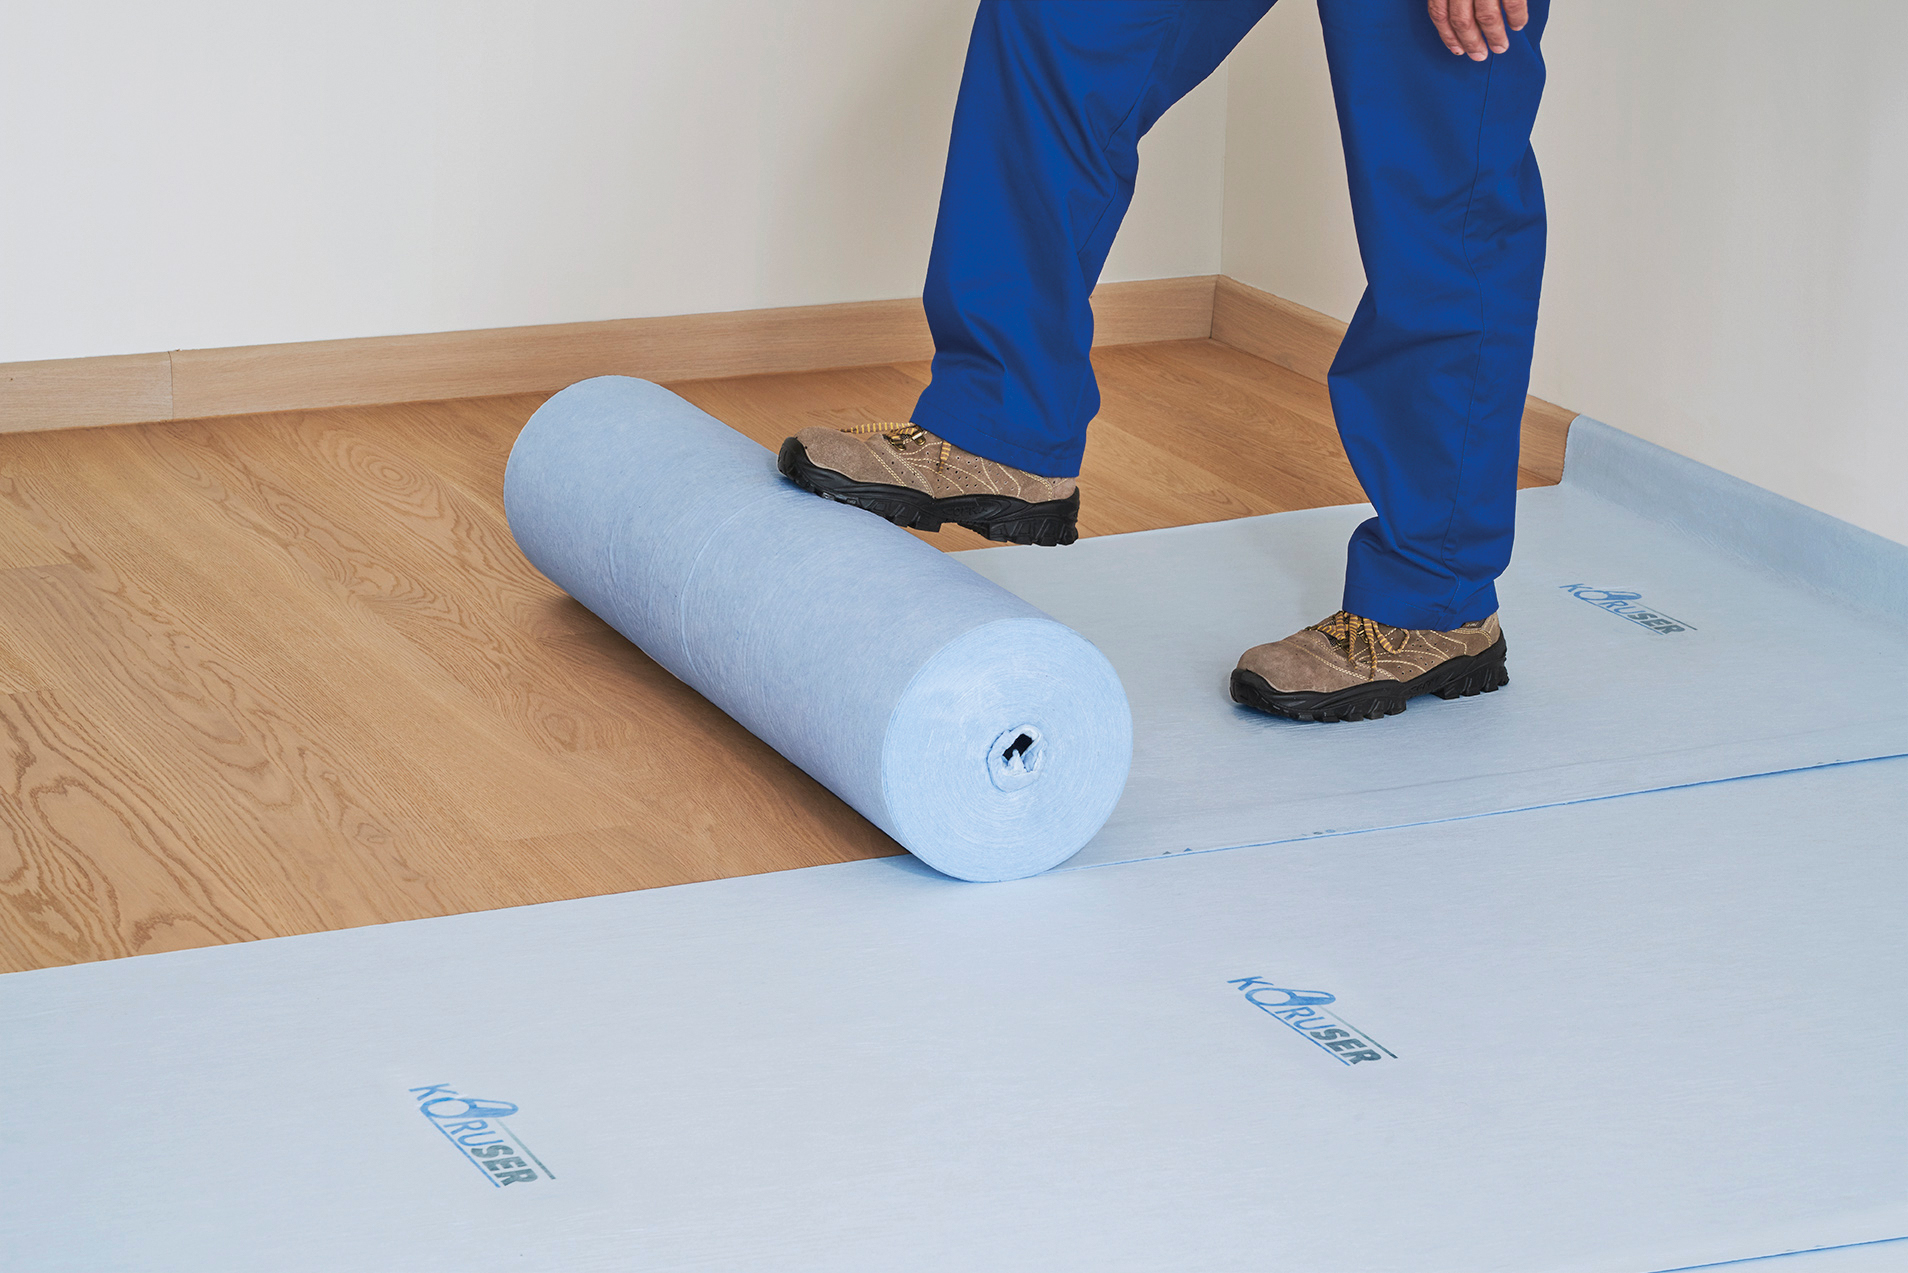 Koruser Temporary surface protector makes prep easy, simple roll out